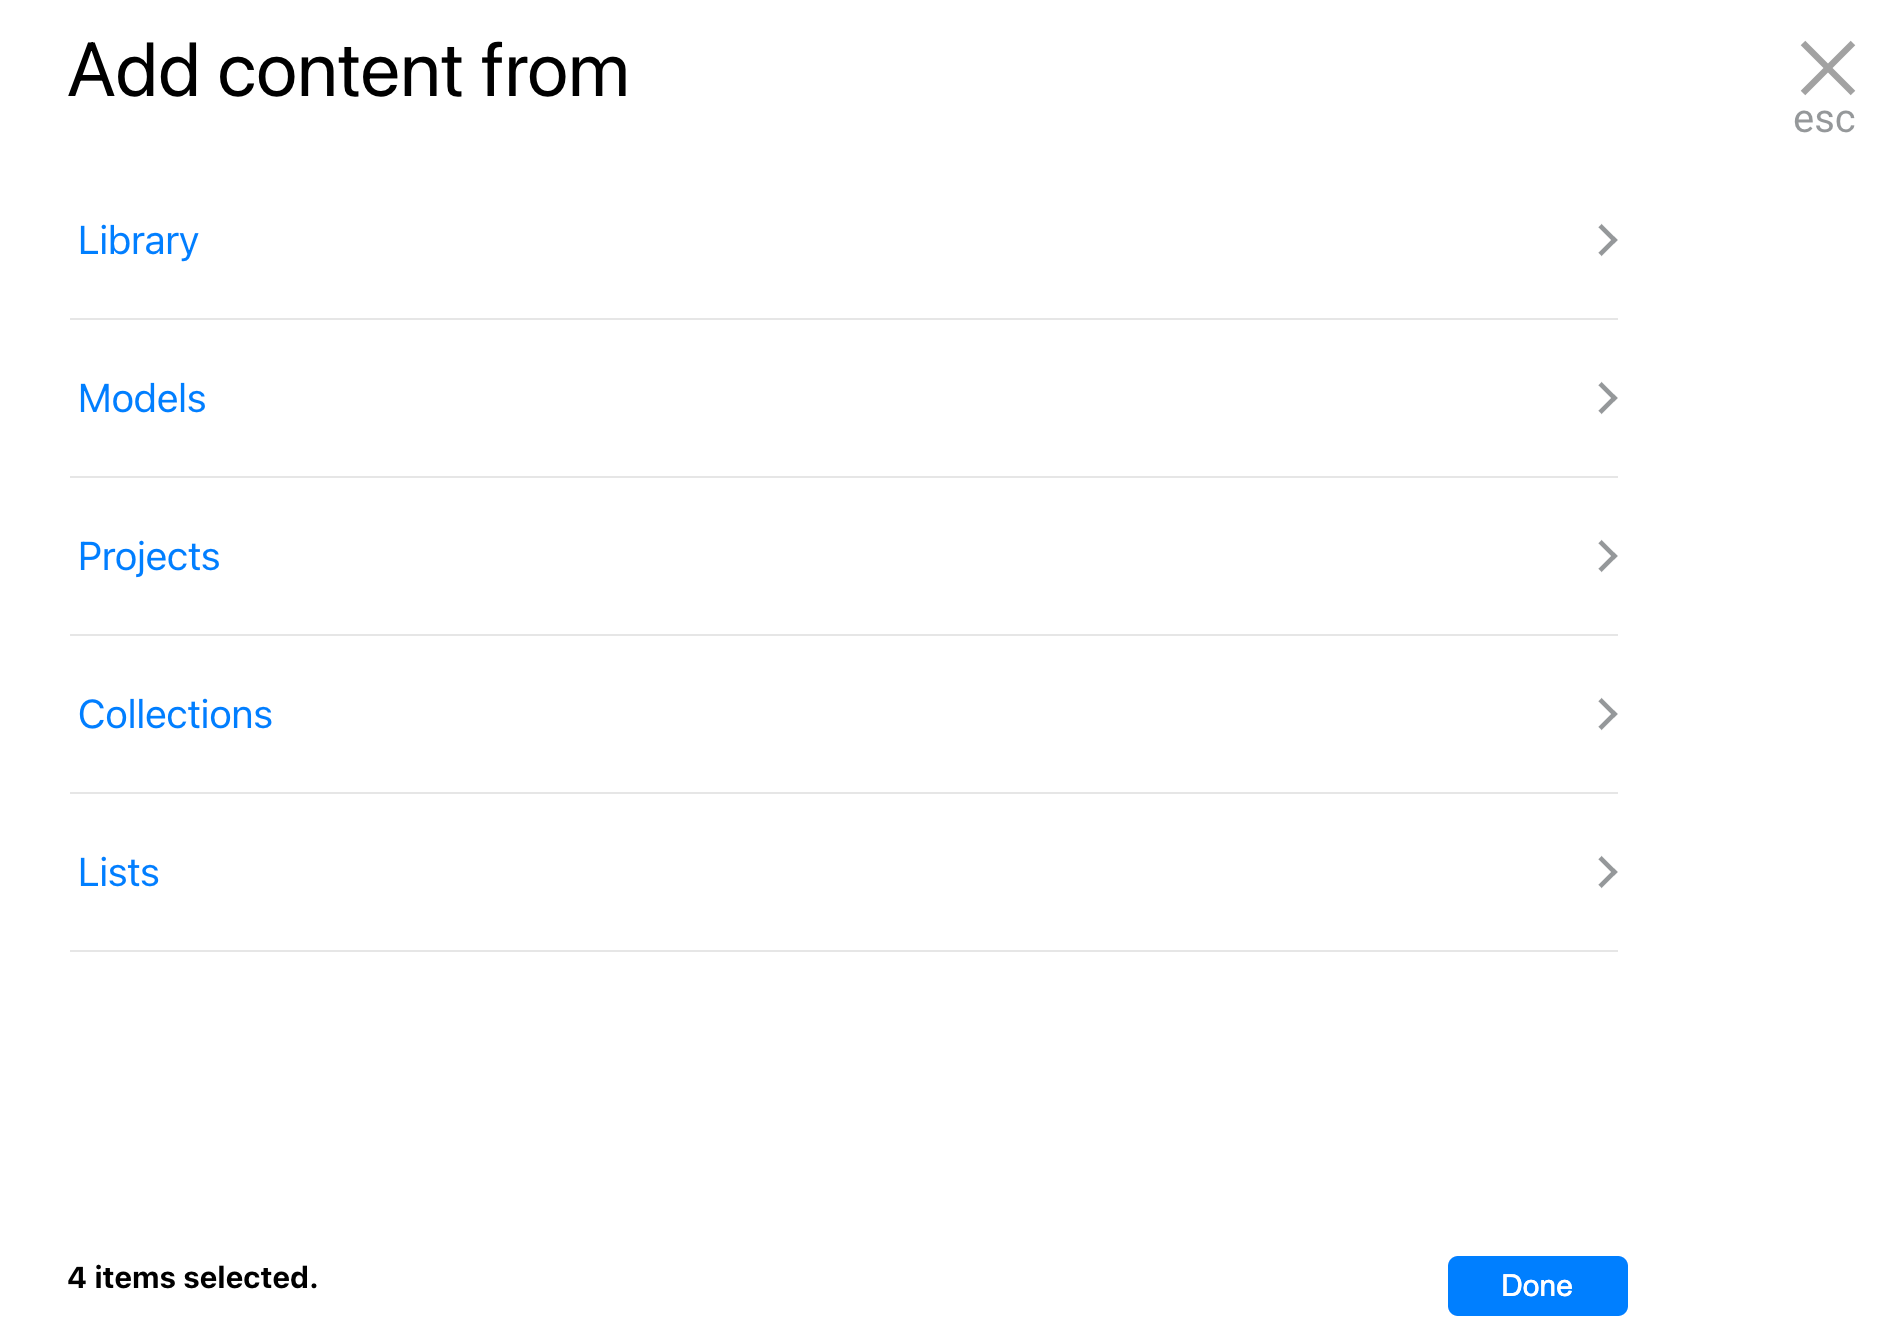 Add content to collection dialog in Kinship.